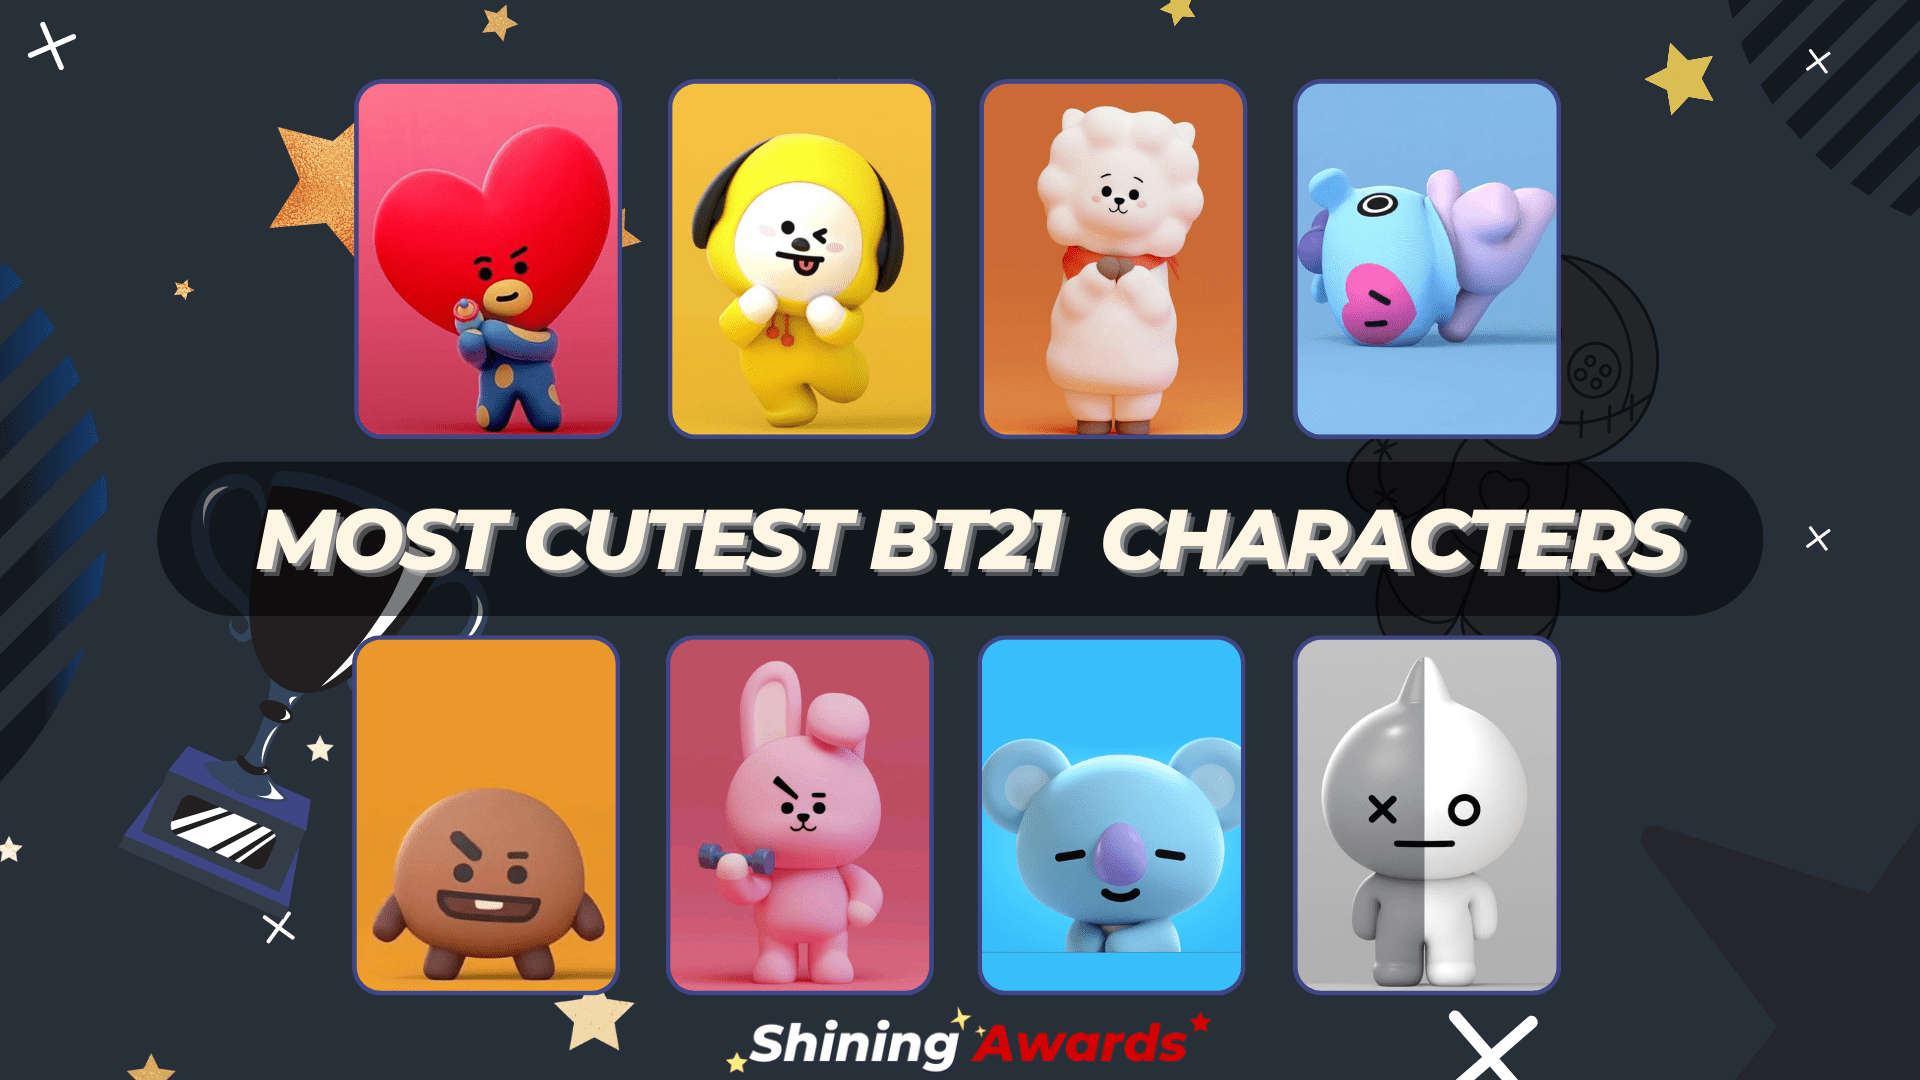 Who is The Most Cutest BT21 Characters